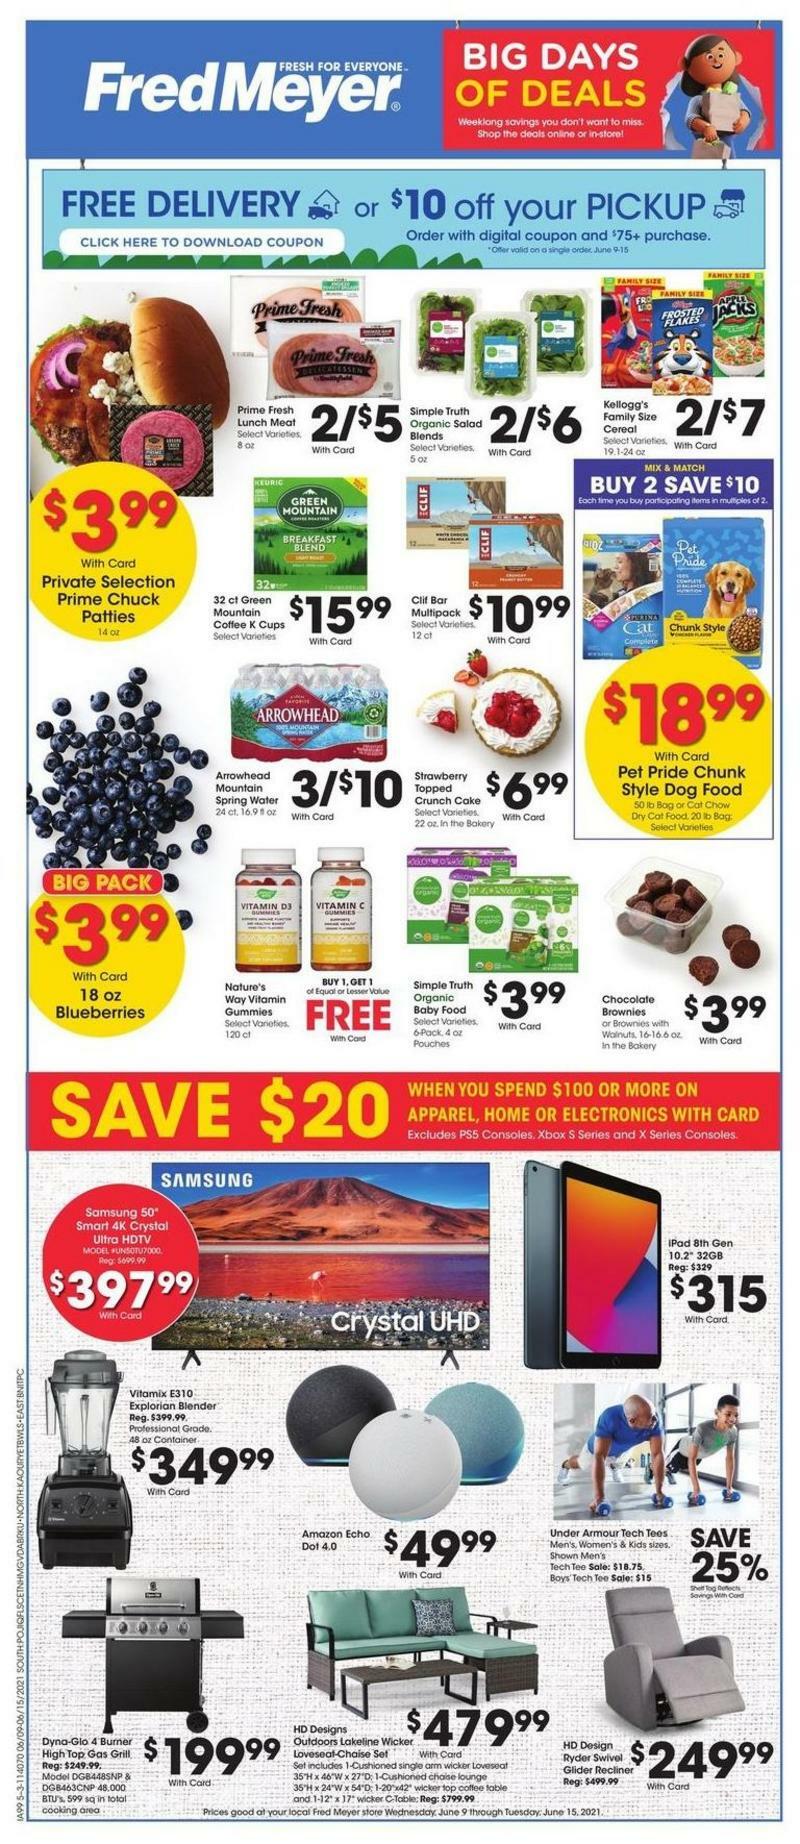 Fred Meyer Big Days of Deals Weekly Ad from June 9